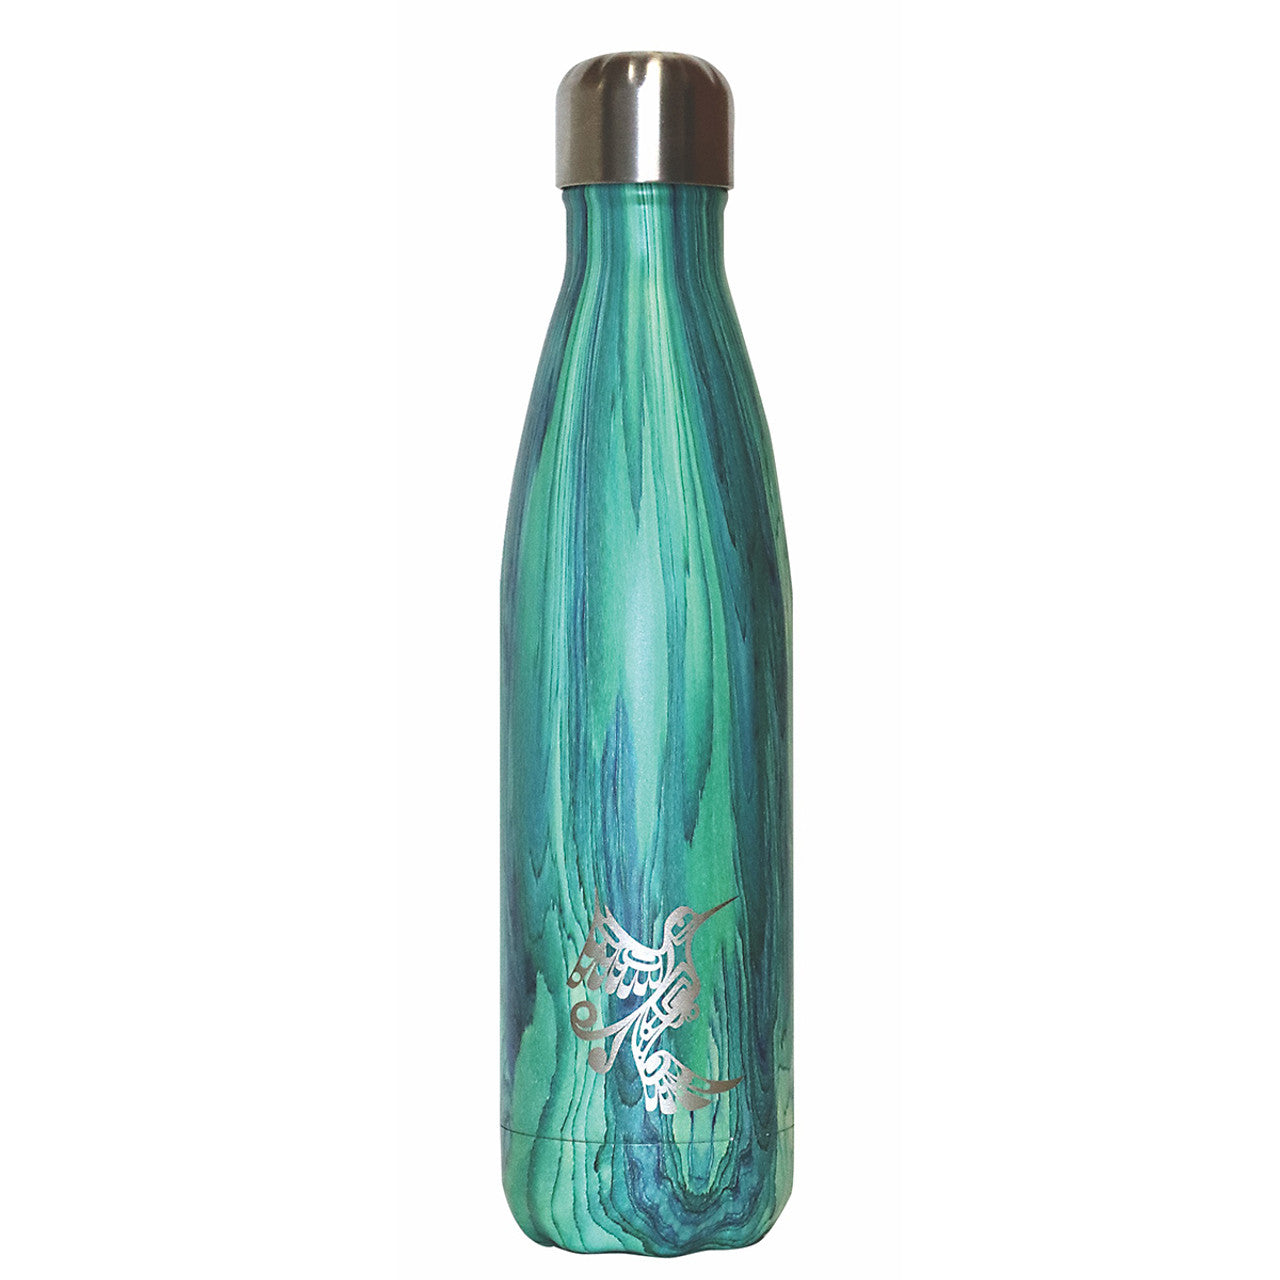 INSULATED BOTTLES - Francis Dick Hummingbird 17oz - BOT12 - House of Himwitsa Native Art Gallery and Gifts